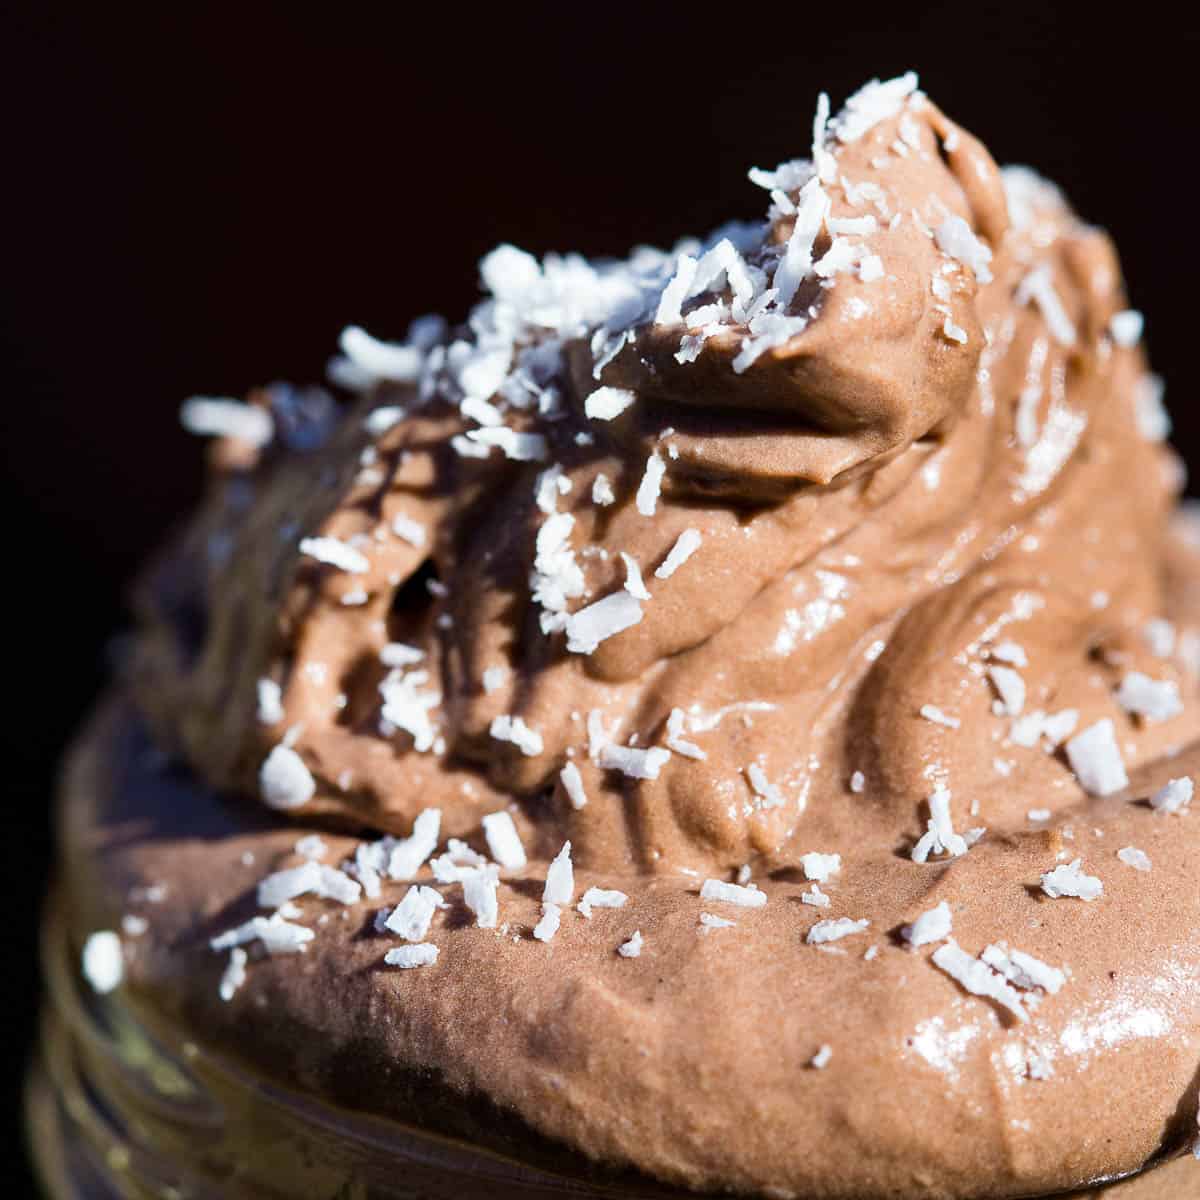 Close up shot of fluffy chocolate mousse garnished with desiccated coconut.